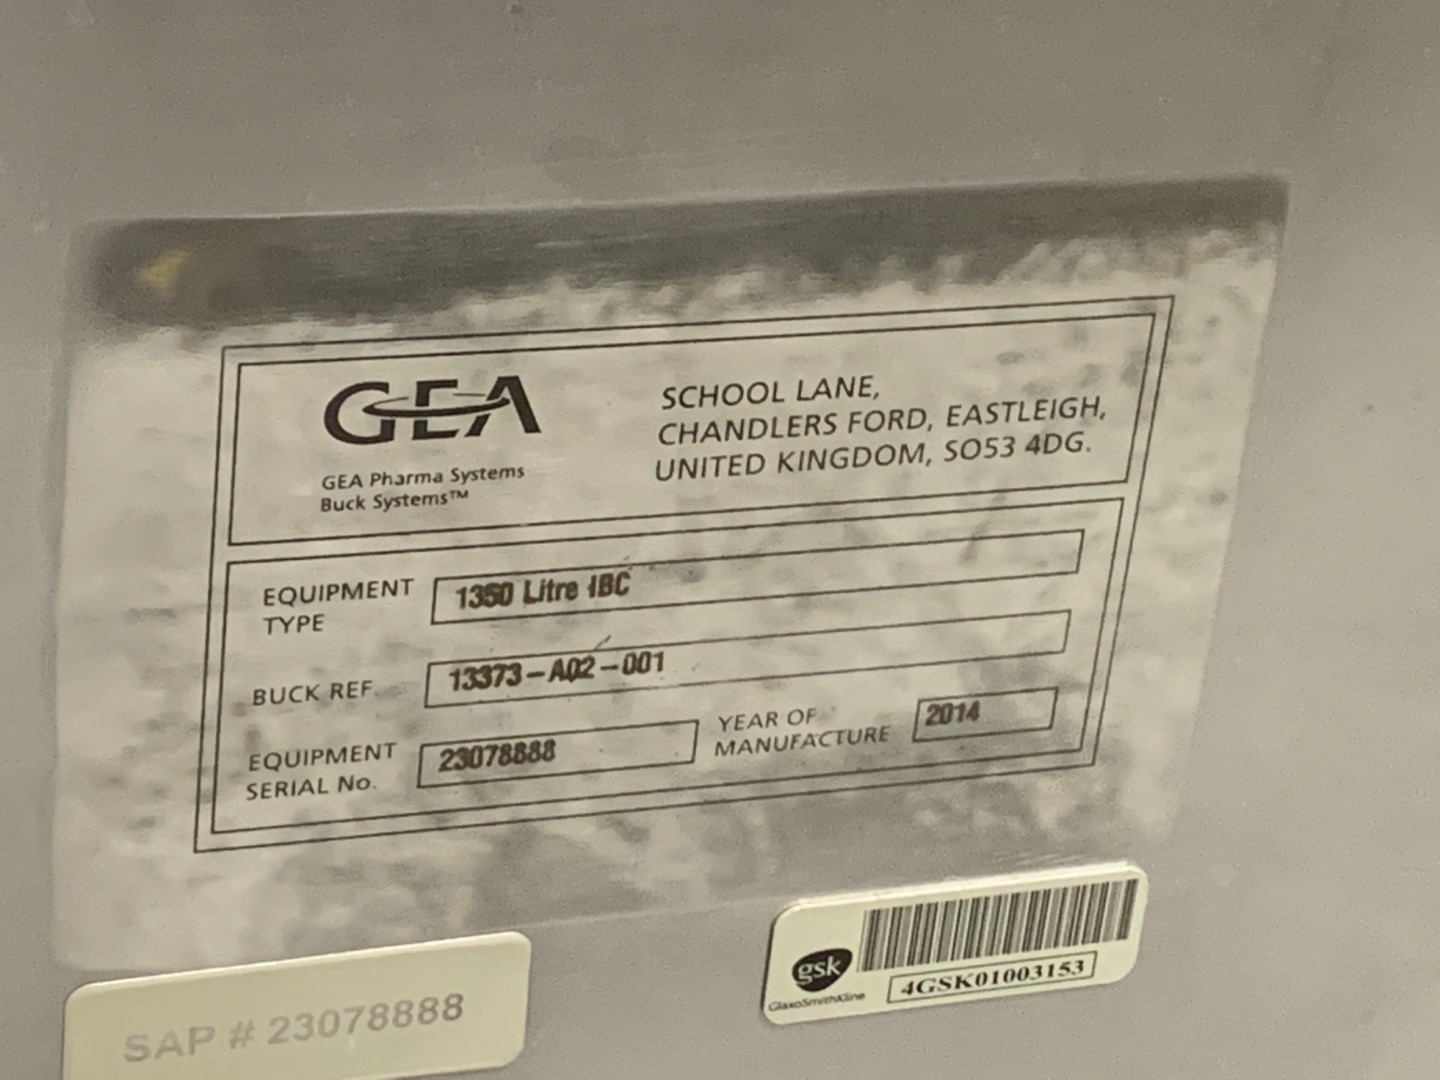 1,350 Liter GEA Buck Systems Tote, model 13373-A02